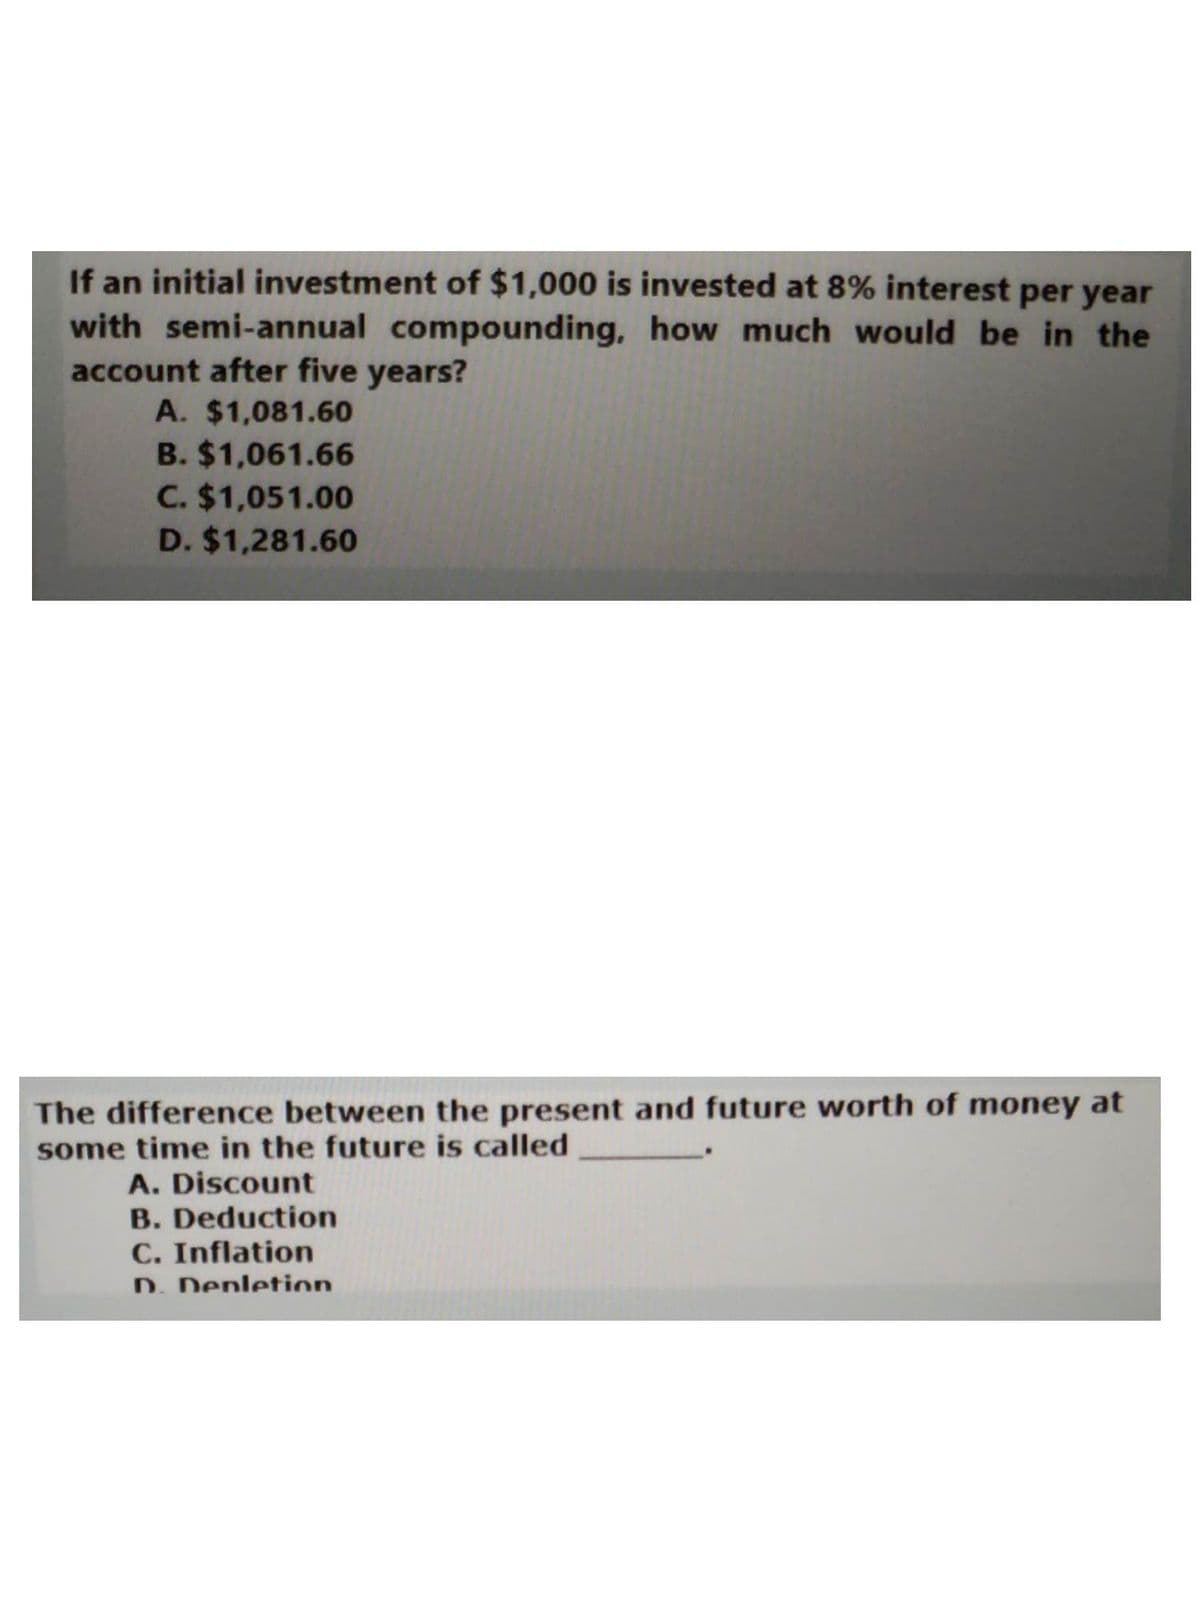 If an initial investment of $1,000 is invested at 8% interest per year
with semi-annual compounding, how much would be in the
account after five years?
A. $1,081.60
B. $1,061.66
C. $1,051.00
D. $1,281.60
The difference between the present and future worth of money at
some time in the future is called
A. Discount
B. Deduction
C. Inflation
D. Depletion